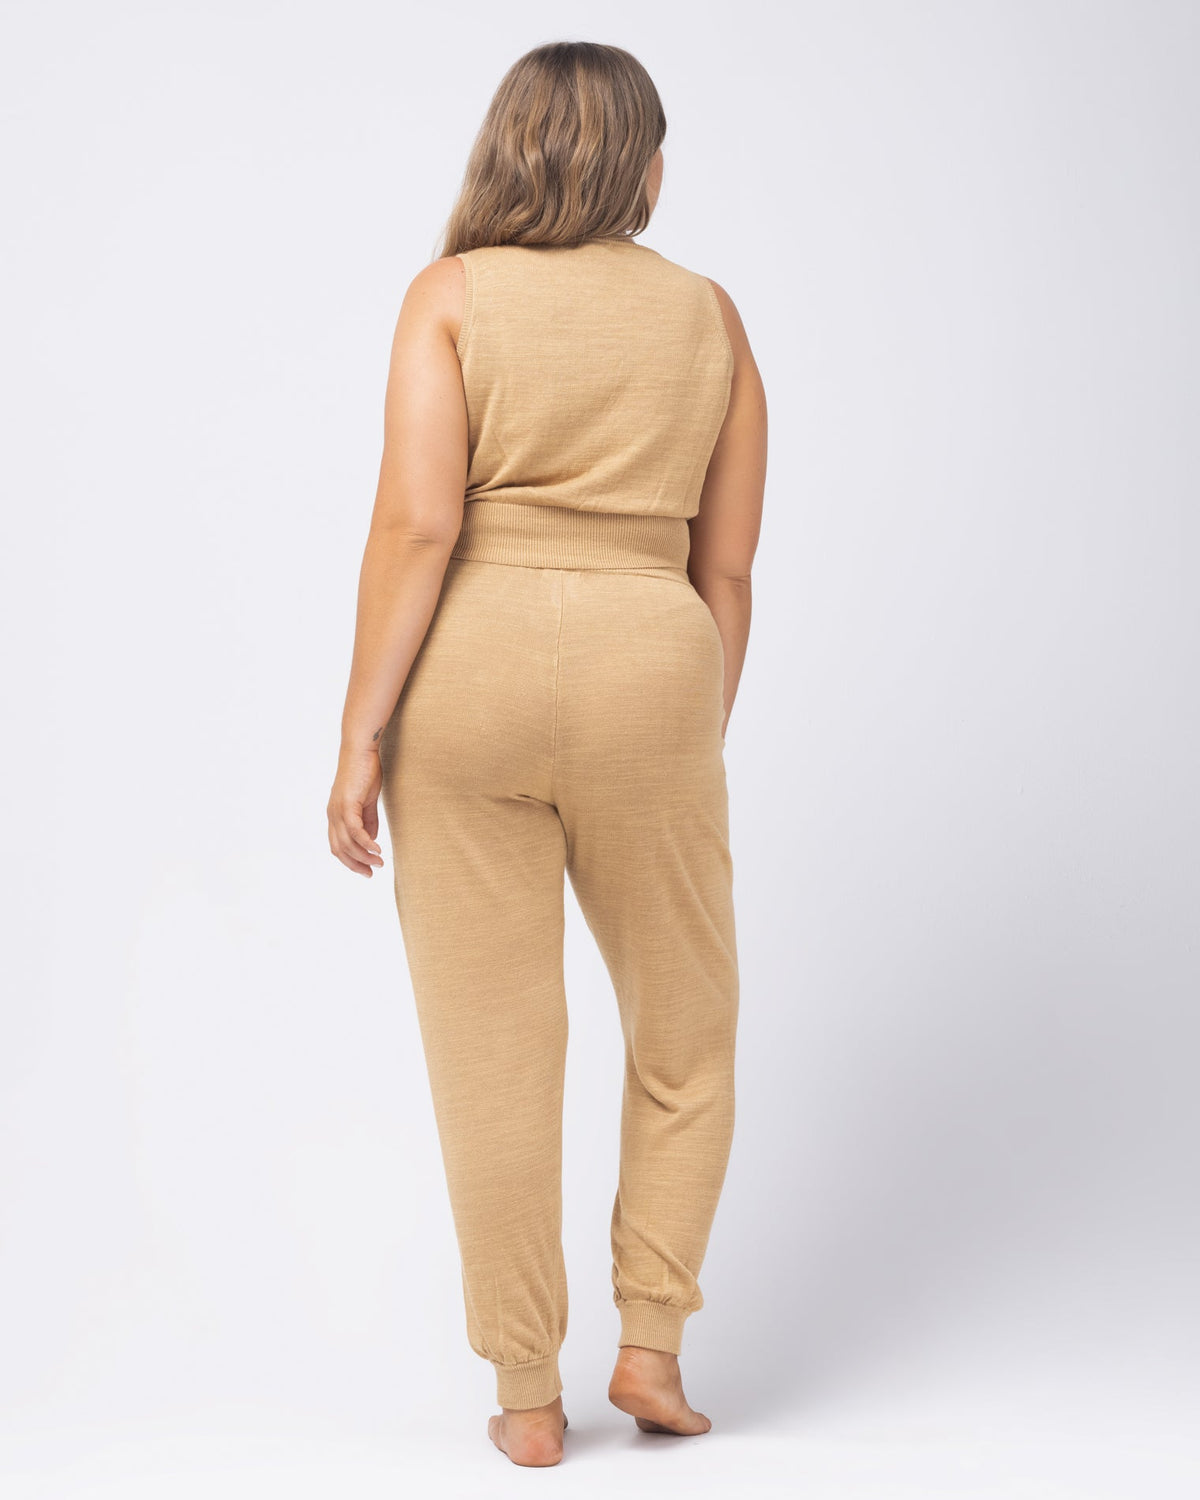 Azores Pant Toffee | Model: Ali (size: XL)